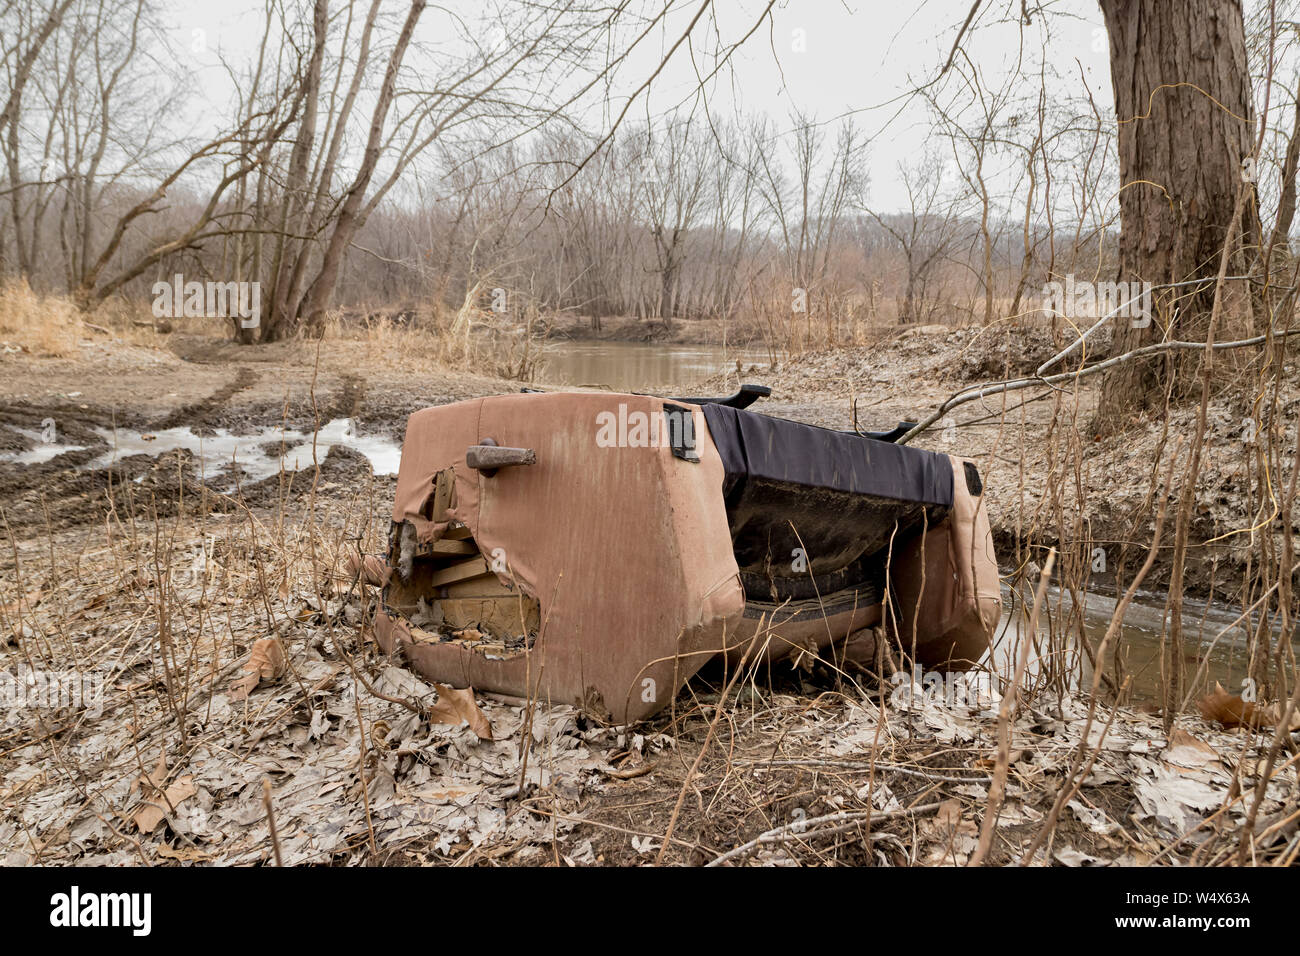 Fly dumping of recliner chair along road by river bank Stock Photo